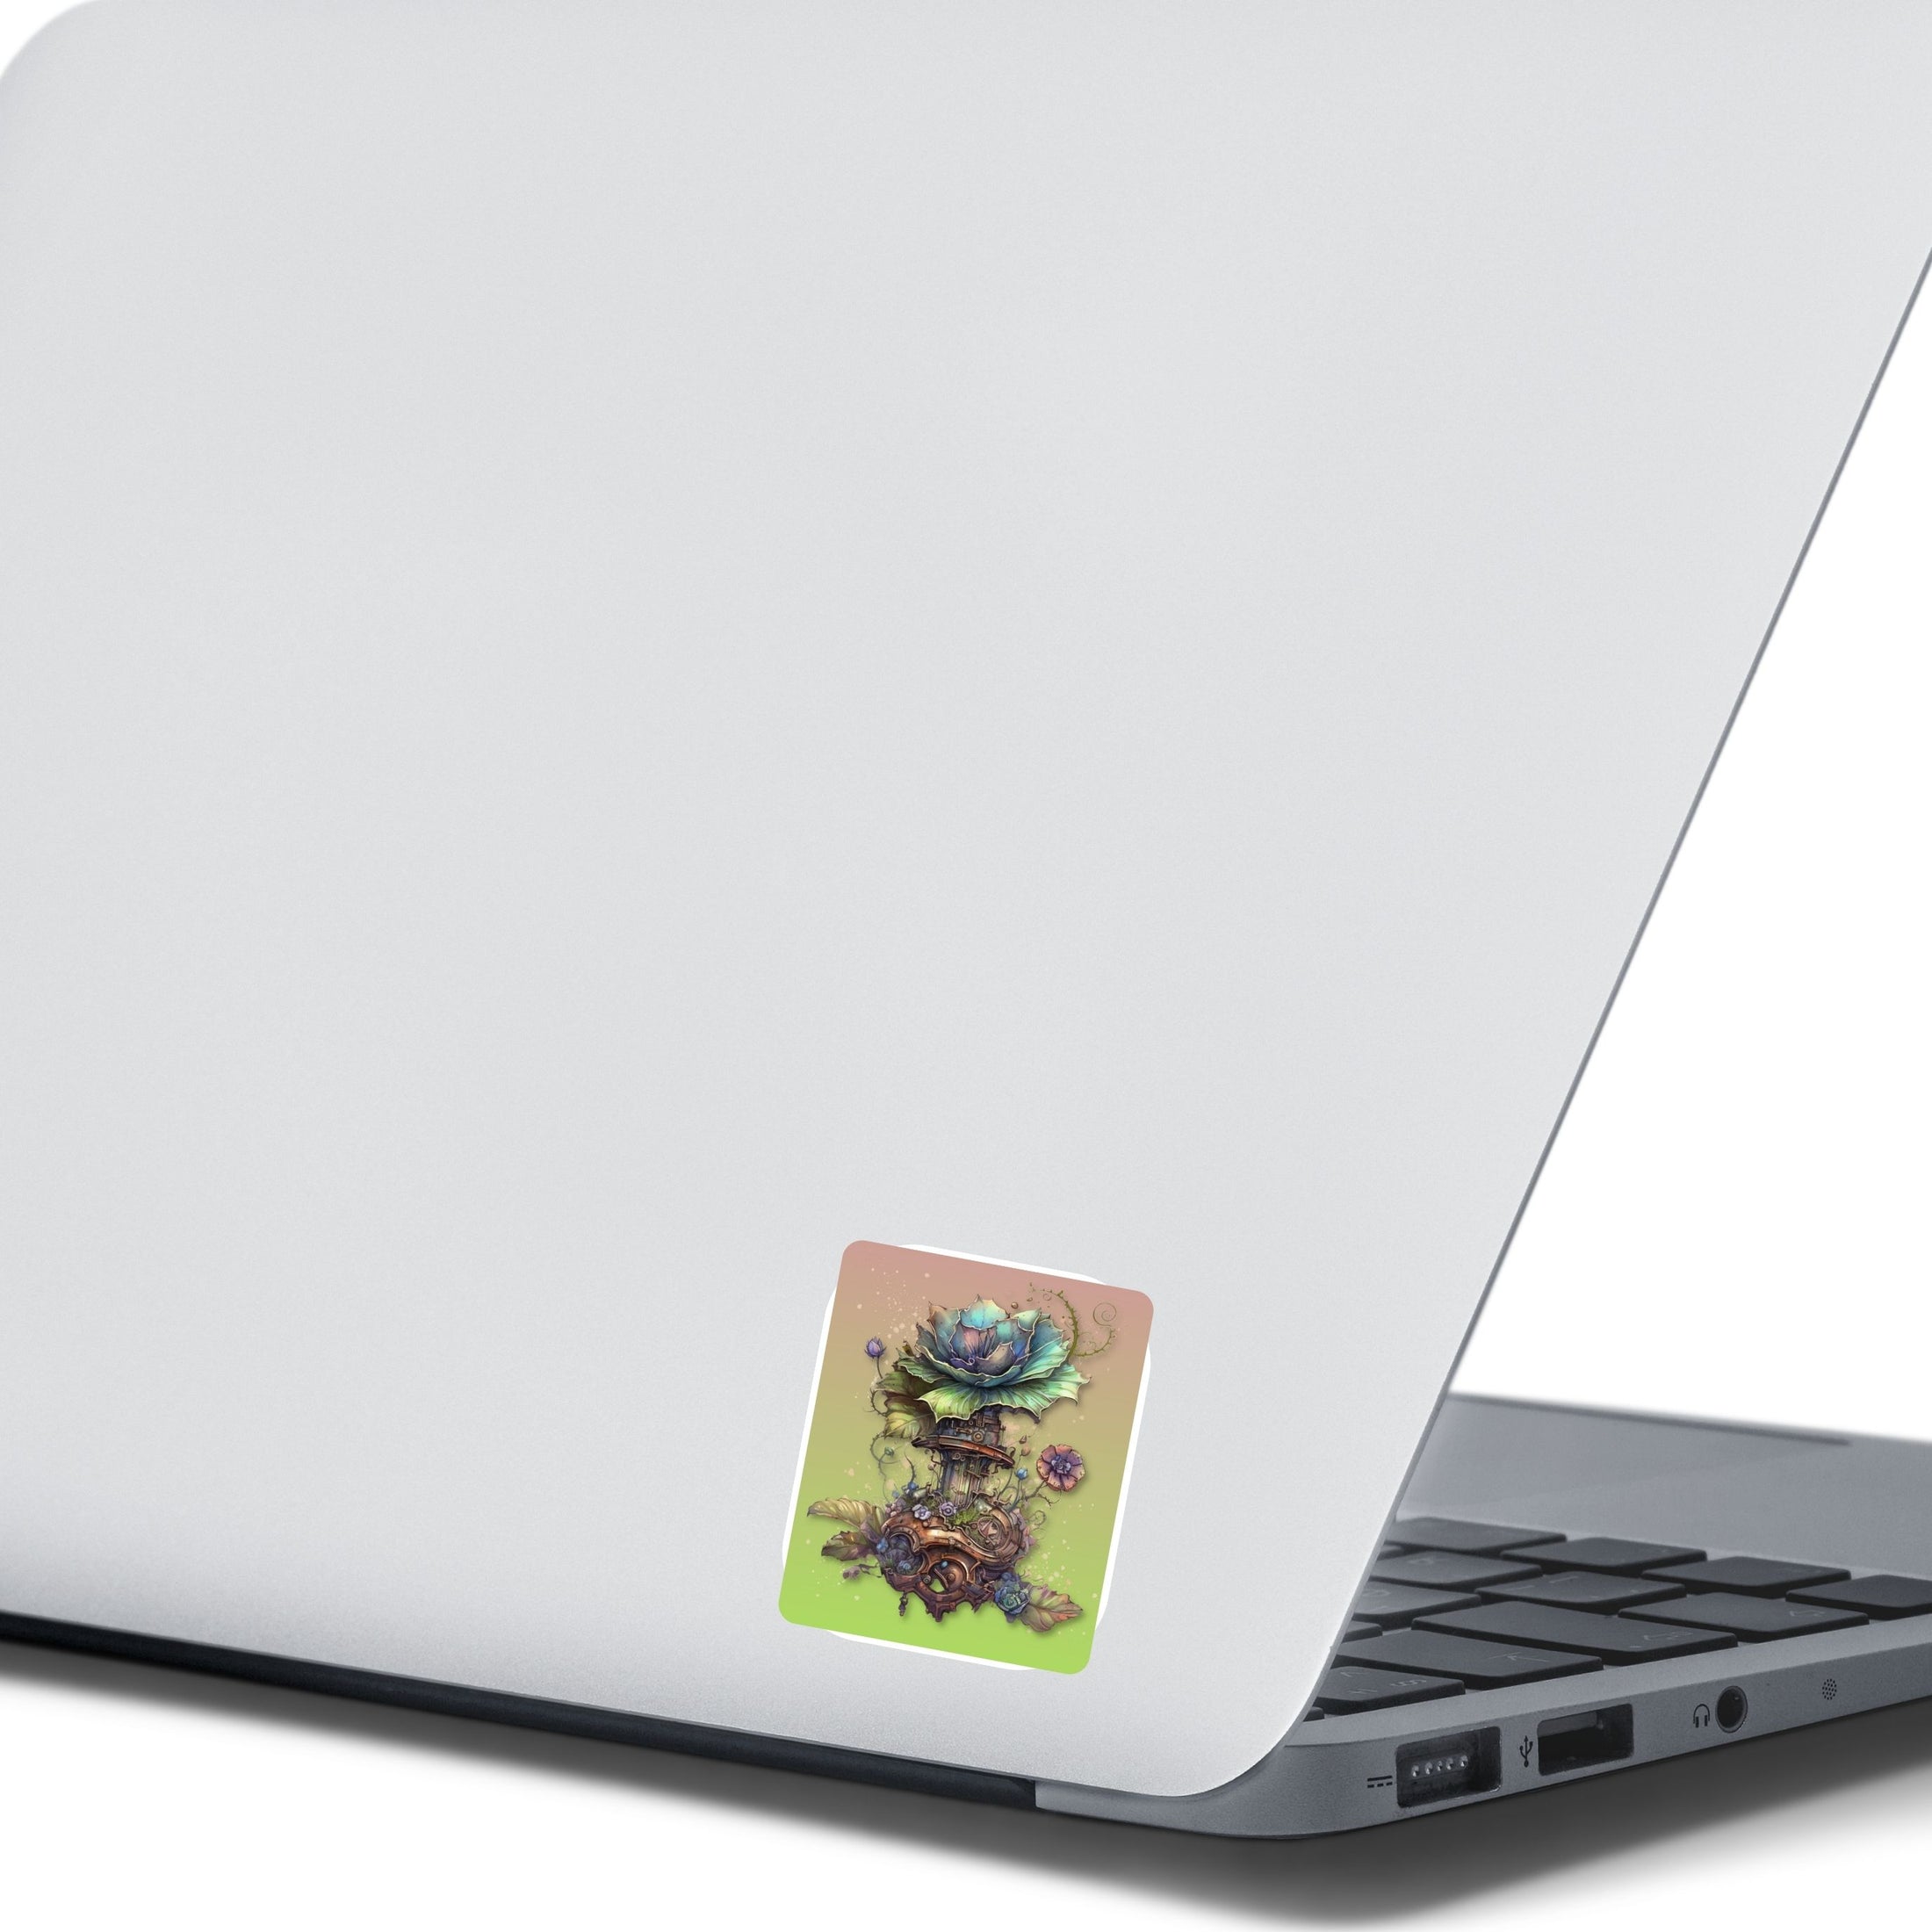 This image shows the steampunk fantasy flower sticker on the back of an open laptop.